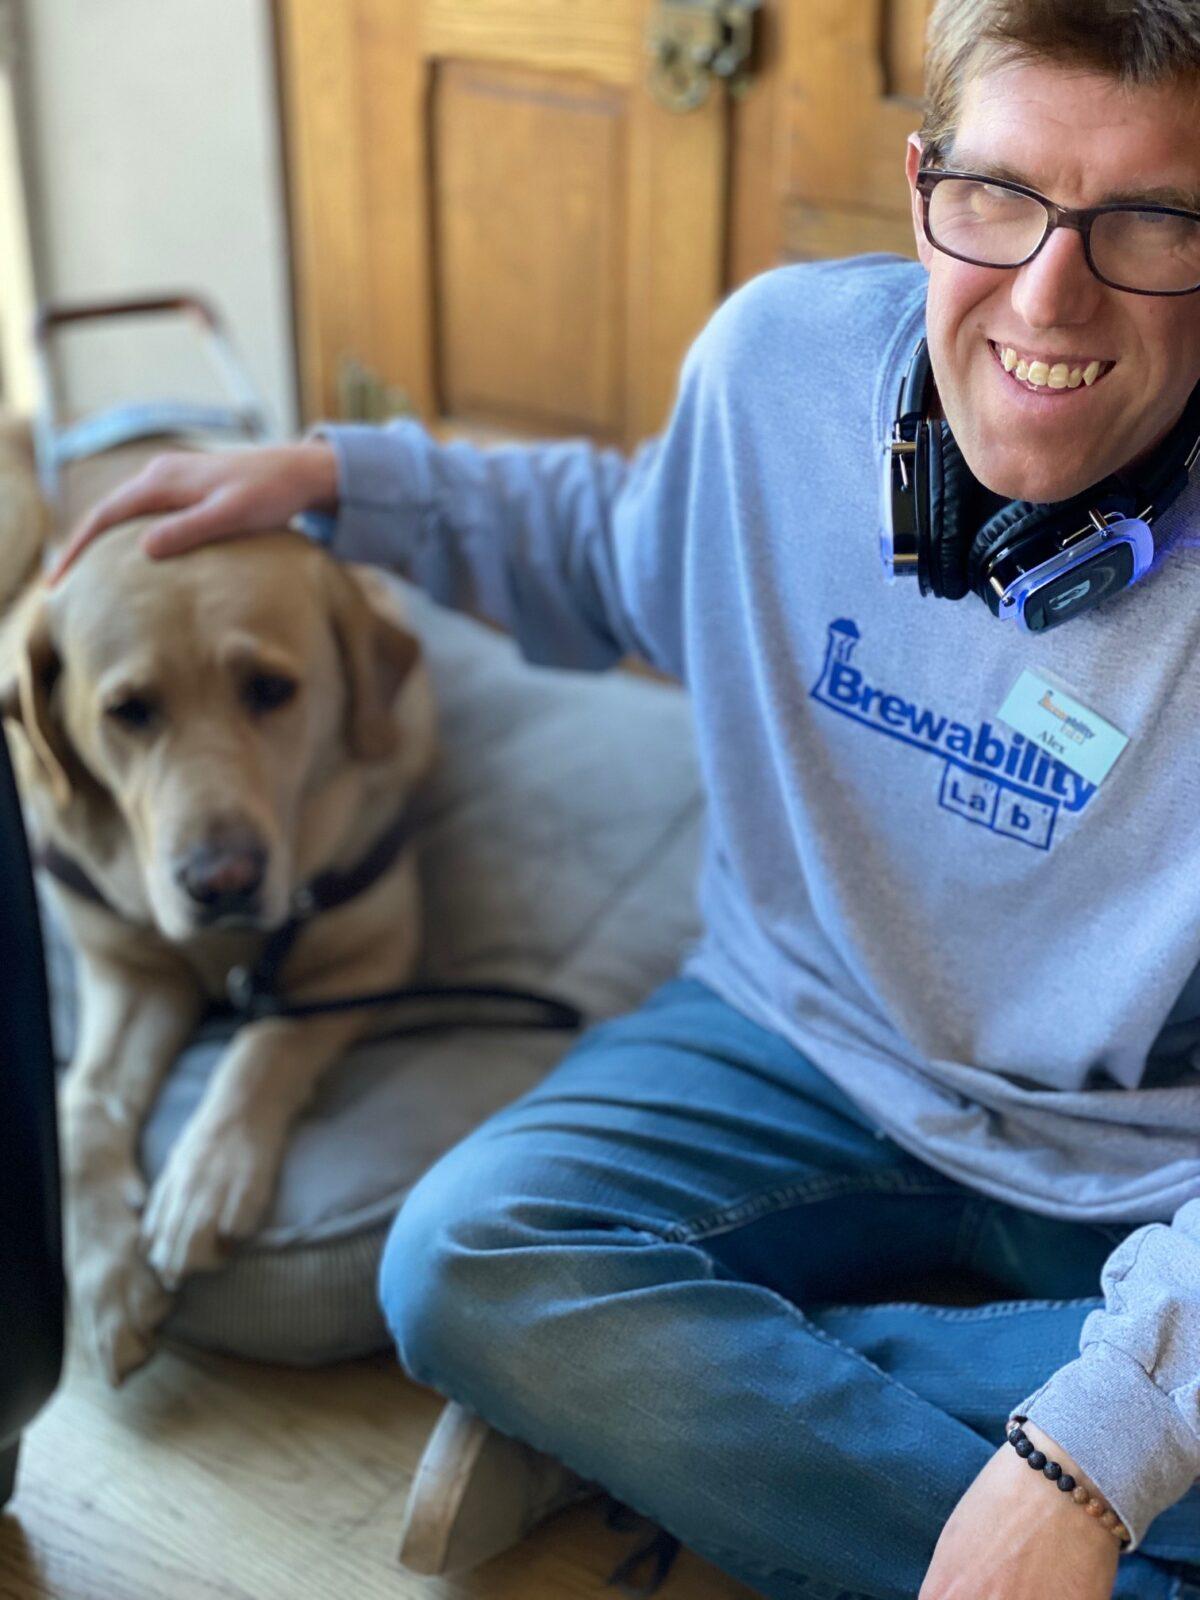 Alex Randall, beertender, and his guide dog, Paulo, are getting ready for Guided By Humanity adaptive inclusive community yoga at Brewability. (Courtesy of <a href="https://www.brew-ability.com/">Brewability Lab</a>)